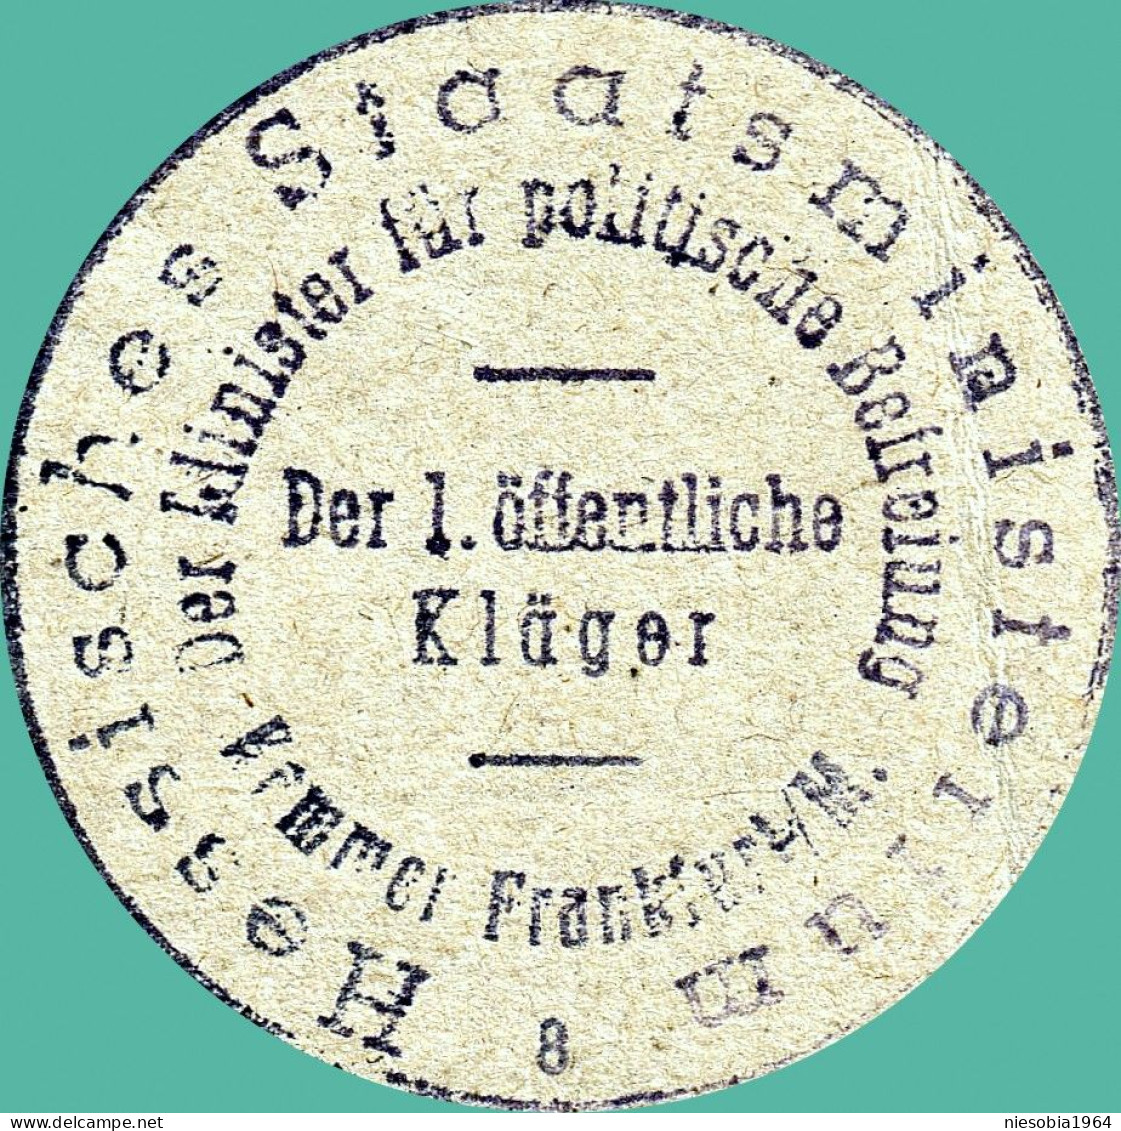 Post Document Releasing The German Karl Schwarz From Any Responsibility For German Nazism And War Crimes. 6 VI 1947 - Covers & Documents